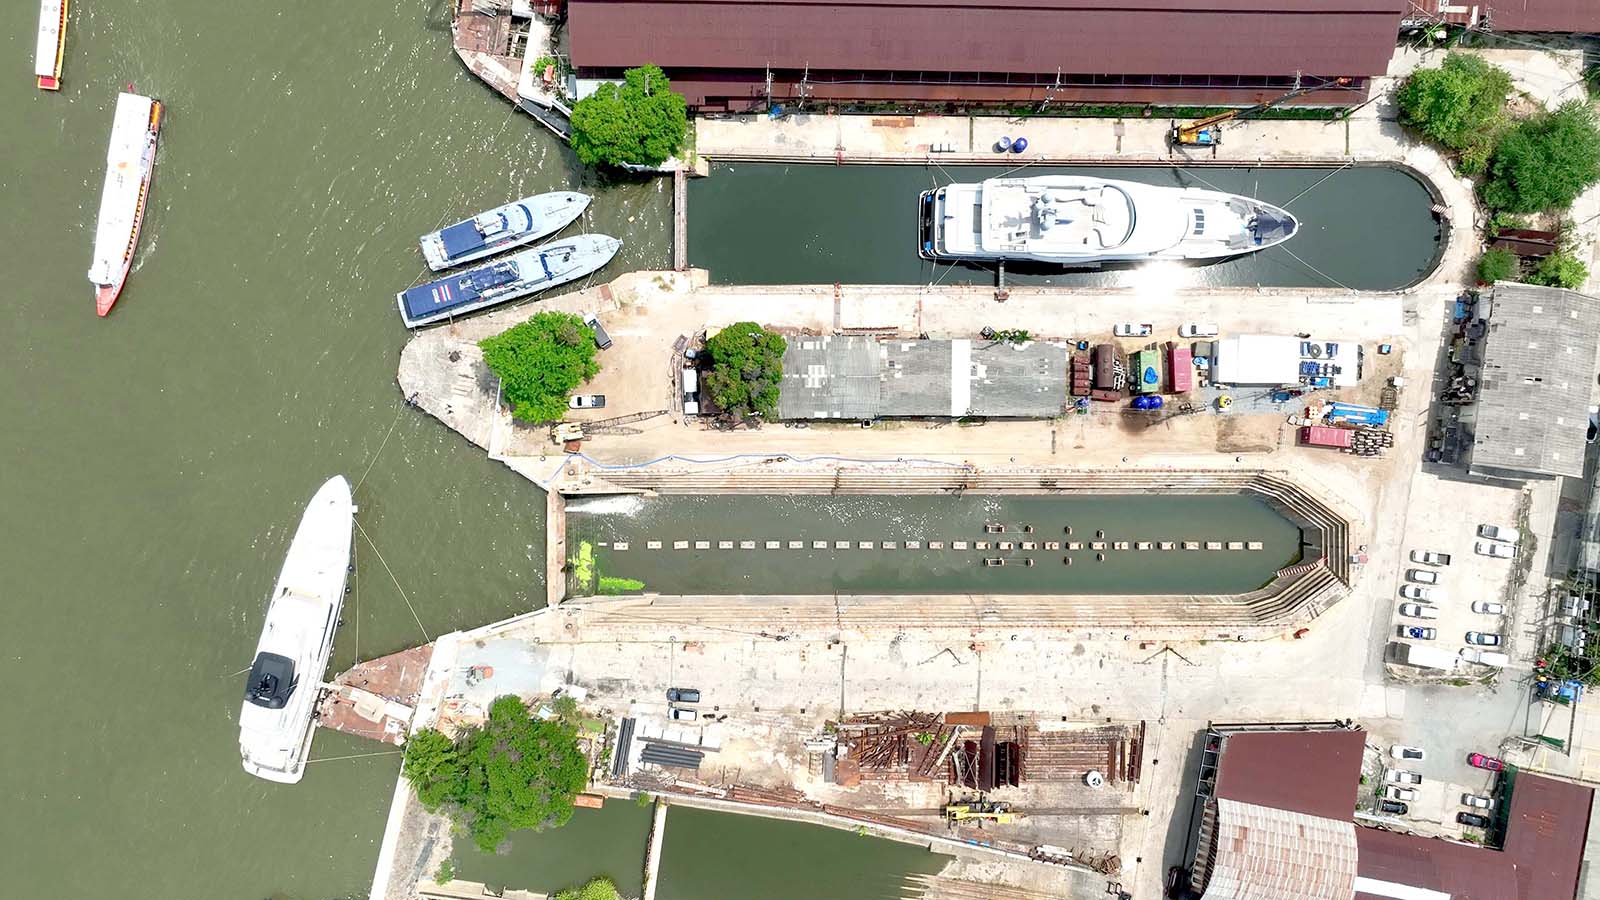 2 Superyachts in Dock for Refit